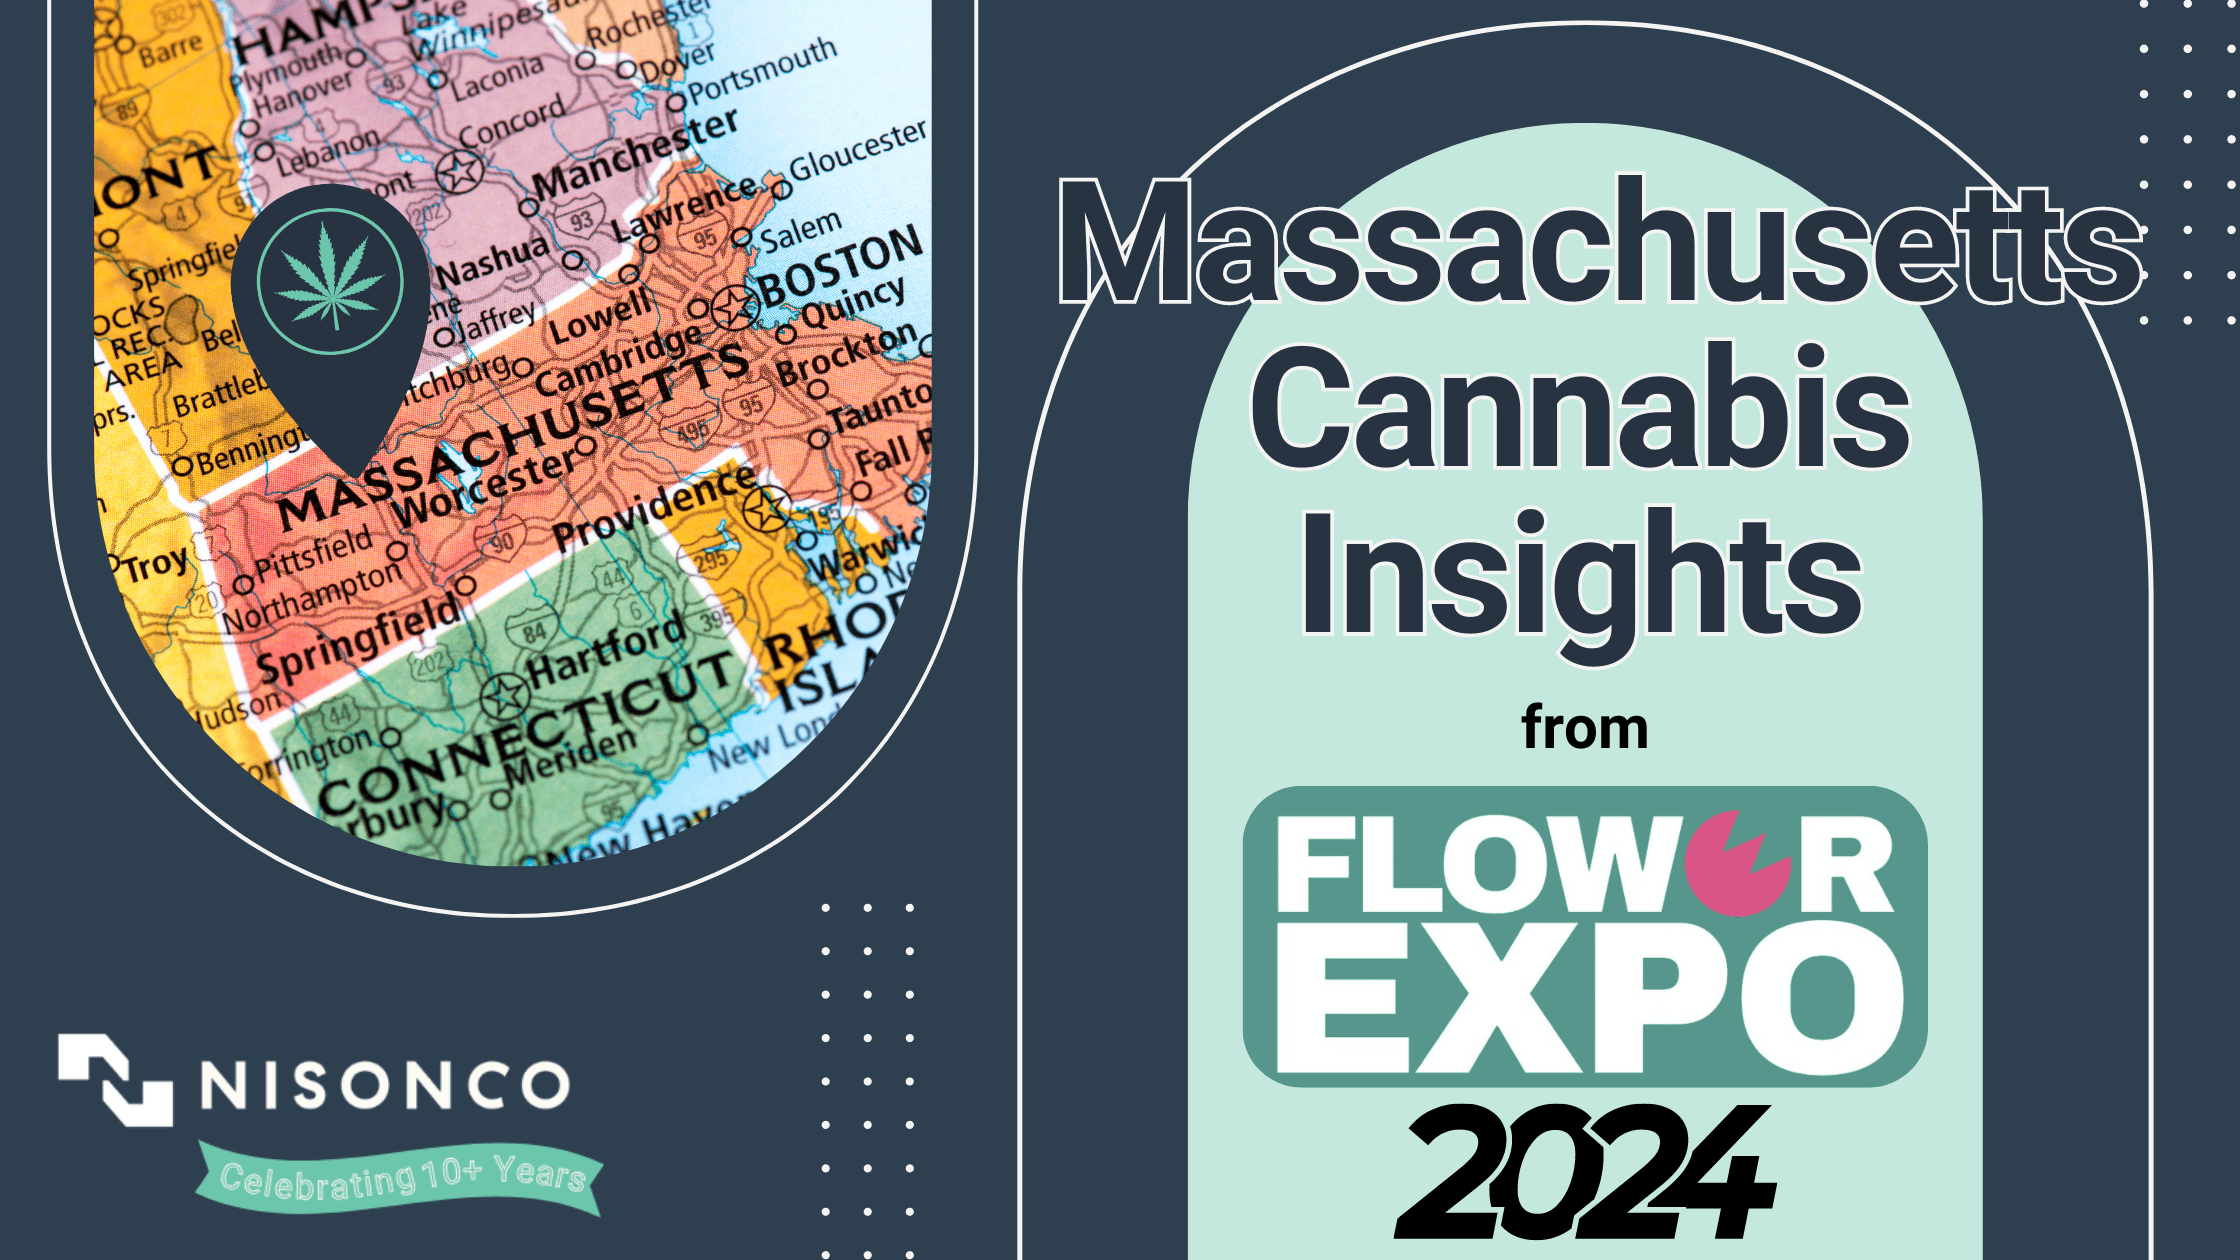 The text, 'Massachusetts Cannabis Insights from Flower Expo 2024' is to the right of a map of New England with a cannabis-leaf-decorated pin pointing to Greenfield, MA